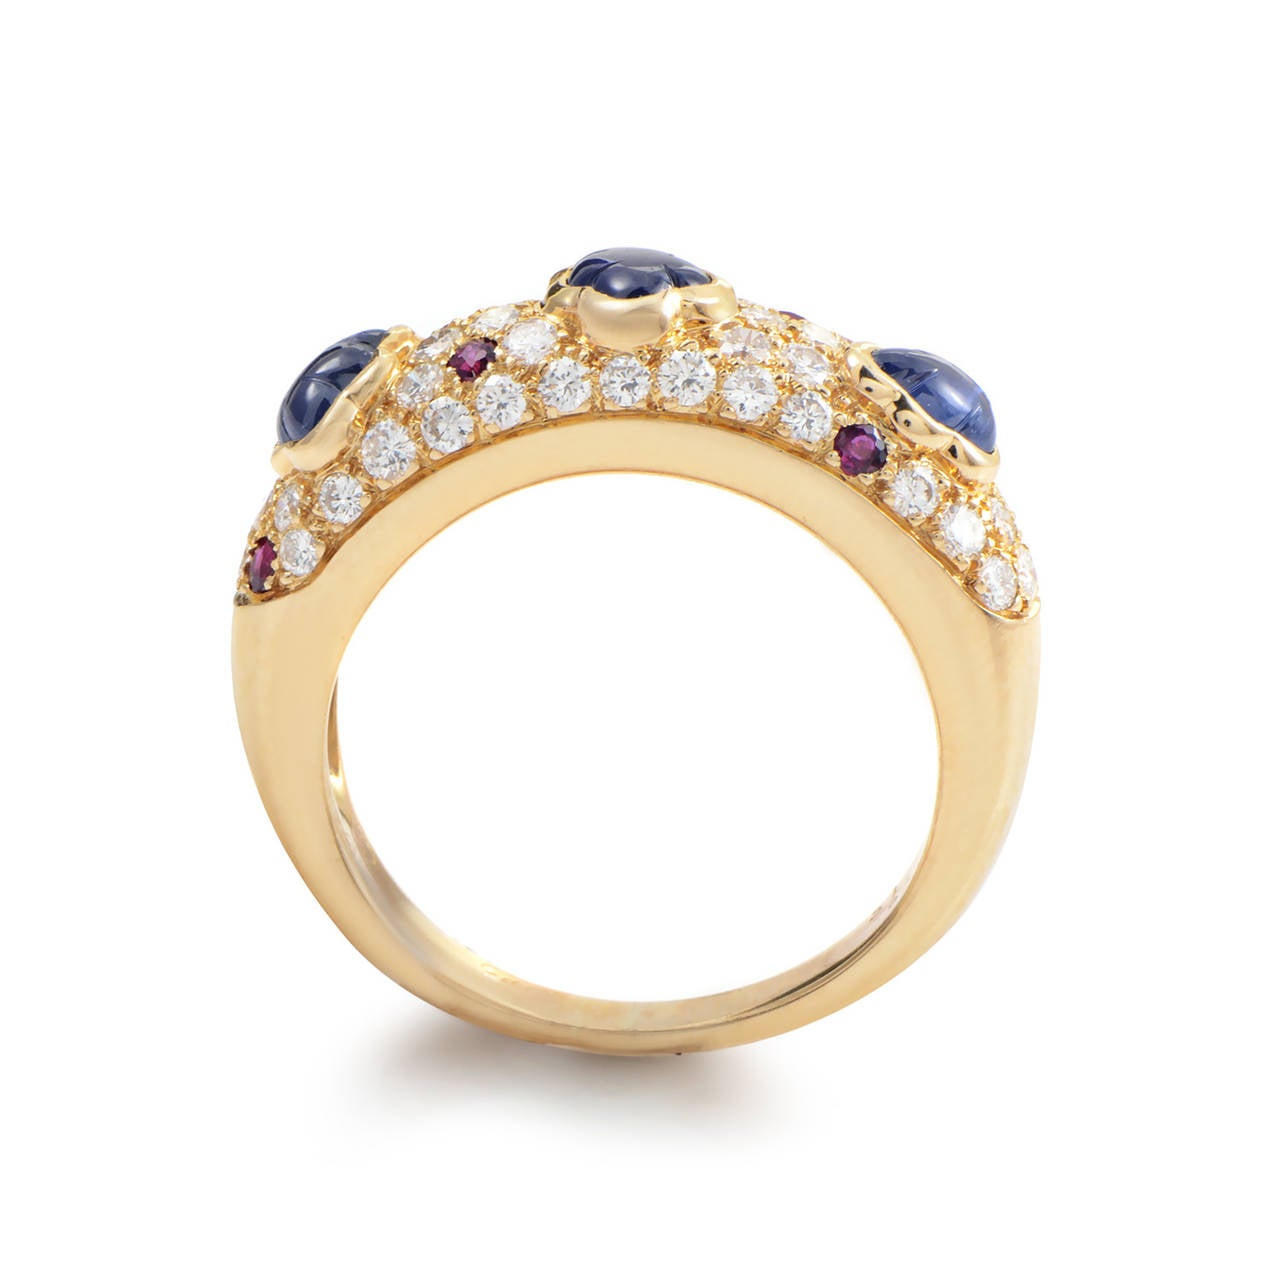 A gorgeous mélange of precious gemstones is the hallmark of this band ring from Cartier. The ring is made of 18K yellow gold and is set with a pave of diamonds and rubies. Lastly, three uniquely shaped sapphires complete this lavish look.
Ring